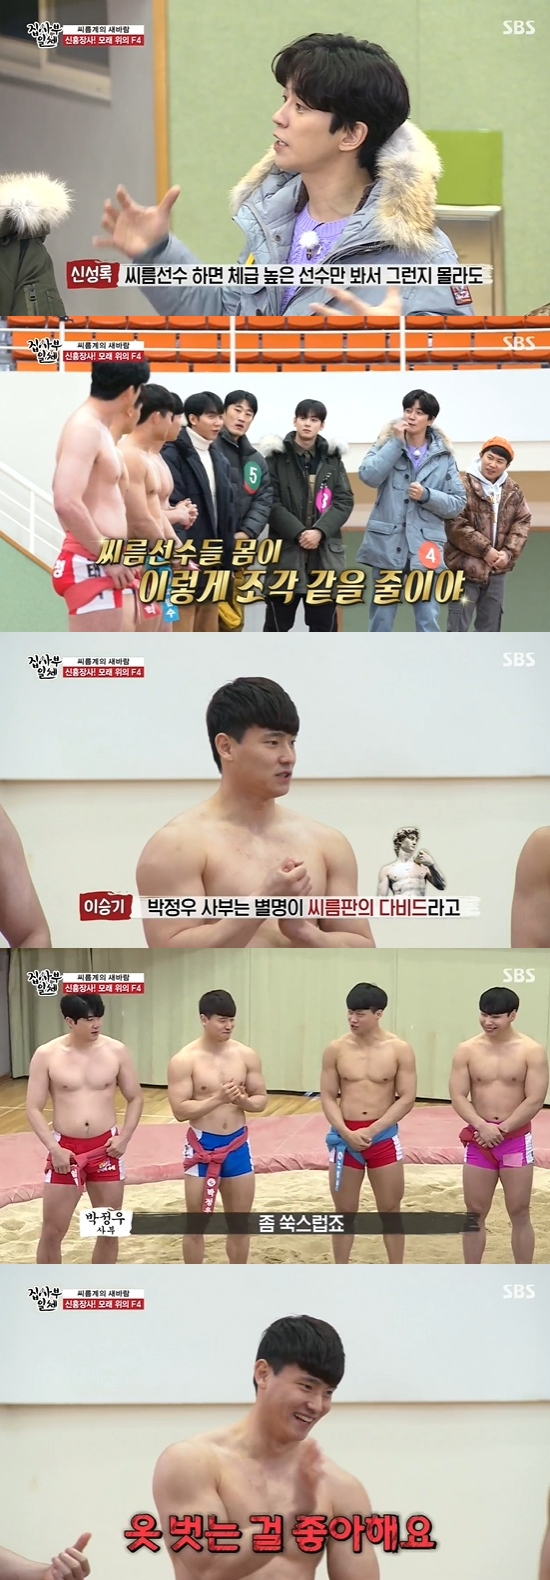 On SBS All The Butlers broadcast on the 24th, Jung Eun-woo, Shin Sung-rok, Lee Seung-gi, Yang Se-hyeong and Kim Dong-Hyun played wrestling battle.On the day, the crew attached a number sticker to the members, and Jung Eun-woo speculated, Are you wrestling with a ladder ride?The meaning of the number is the expected ranking of the members selected by the master.Starting with Kim Dong-Hyun, Lee Seung-gi, Jung Eun-woo, Shin Sung-rok, and Yang Se-hyeong were in order.If you do with a wrestler, you can win, Cha Jung Eun-woo asked Kim Dong-Hyun, but Kim Dong-Hyun said, Just lose.Lee Seung-gi said, Personally, the most scary opponent is Jung Eun-woo.Then came the youngest Taebaek in the 2000s, Heo Seon-haeng, Taebaek, Taebaek, and David of Ssireum, and Im tae-hyuk.Shin Sung-rok was surprised, saying, I first knew that the wrestlers bodies were like sculptures.Lee Seung-gi referred to the nickname of Night If, David of the Wrestling.Night if said, The fans built it, its embarrassing, but Noh Bum-soo, heo Seon-haeng and im tae-hyuk said Night if likes it.Heo Seon-haeng said of im tae-hyuk: Im an entertainer in a wrestling version; Im really good at wrestling.When I was a child, I thought Tae Hyuk wanted to be like that while watching his brothers video. Night if said, I am not. When asked if the Vic-Fezensac title was great, im tae-hyuk, who shined in the 17th Vic-Fezensac title, said, I think it is great to go over ten.I did it 17 times. It is the most active.In the meantime, the basic training of wrestling began. After the rope-riding training, the lower body training that Night if actually did began. It was a jumping squat.Kim Dong-Hyun said, Its already hard? As soon as I started, I felt that it was a hell training.Lee Seung-gi was caught turning in the other direction, and the members had to start the jumping squat from the beginning because of Lee Seung-gi.Kim Dong-Hyun laughed, saying, Why should someone else avoid it? We were doing well.Members appealed, The legs dont move.Lee Seung-gi said, I wanted to be able to do it until I did five, but suddenly I felt like someone was holding down from the bottom.Kim Dong-Hyun asked Night if he should not fall down if he sticks to a few people, and Night if said, I think it will be possible for three to four people.Shin Sung-rok, Lee Seung-gi, Yang Se-hyeong, and Jung Eun-woo stuck to knock the Night if.Rather, Night if put the technology on Lee Seung-gi, but not long after, Night if fell; Night if said, Whos the hat?Its a lot of power, surprised Kim Dong-Hyun, who sneaked in wearing Yang Se-hyeongs hat.The masters then chose a member to coach one-on-one.Im tae-hyuk chose Jung Eun-woo, Night if Shin Sung-rok, and Noh Beom-su chose Yang Se-hyeong.The situation remains only Choices of heo Seon-haeng.Lee Seung-gi appealed, I will make you Master Vic-Fezensac, and Kim Dong-Hyun said, Is not it energy to teach others?Ill rest and burn you a horse, said Choices of heo Seon-haeng, who was Lee Seung-gi.Im tae-hyuk passed the left-hander technique to a good-core car, Jung Eun-woo, who admired it as burning.No Beom-soo told Yang Se-hyeong how to overcome weight-weight car. It was a Qi Qi technology.This Night if explained to Shin Sung-rok how to cope with Qi Qi per penny.On the other hand, heo Seon-haeng told Lee Seung-gi, You dont need that number of fights, you just have to do the field legs at the same time that you start, I did it with Vic-Fezensac.Kim Dong-Hyun went around and watched the members practice and taught himself.The All The Butlers ship Vic-Fezensac Ssireum competition began; first, Lee Seung-gi and Yang Se-hyeongs Battle.Lee Seung-gi won in three seconds with a field leg; then Shin Sung-rok and Jung Eun-woos Battle.Shin Sung-rok, who everyone expected to win the Shin Sung-rok, who took deep into the scourge, failed to get up and sat down; the game started with a full posture again.It was a victory for Jung Eun-woo, who responded by turning Shin Sung-roks left-back over.Come up whoever you are, Ill answer with my field legs, said Lee Seung-gi, who advanced to the final with a minor victory.Kim Dong-Hyun and Jung Eun-woo won Battle.When Jung Eun-woo was in the center, Kim Dong-Hyun attacked, and Jung Eun-woo held on and eventually fell.Finally, the final between Lee Seung-gi and Kim Dong-Hyun; Lee Seung-gi constantly put on field bridge skills, but Kim Dong-Hyun hit back.Heo Seon-haeng said Kim Dong-Hyuns knee was first touched, and VAR readings began; it was Kim Dong-Hyuns first win.In the second Battle, Lee Seung-gi finally passed Kim Dong-Hyun over to the field bridge - and the last Battle.When Kim Dong-Hyun pulled his hand off the scourge, Lee Seung-gi put on a field bridge technique, but Kim Dong-Hyun won by pushing Lee Seung-gi in the moment.Kim Dong-Hyun received a gold calf/ Photo = SBS broadcast screen